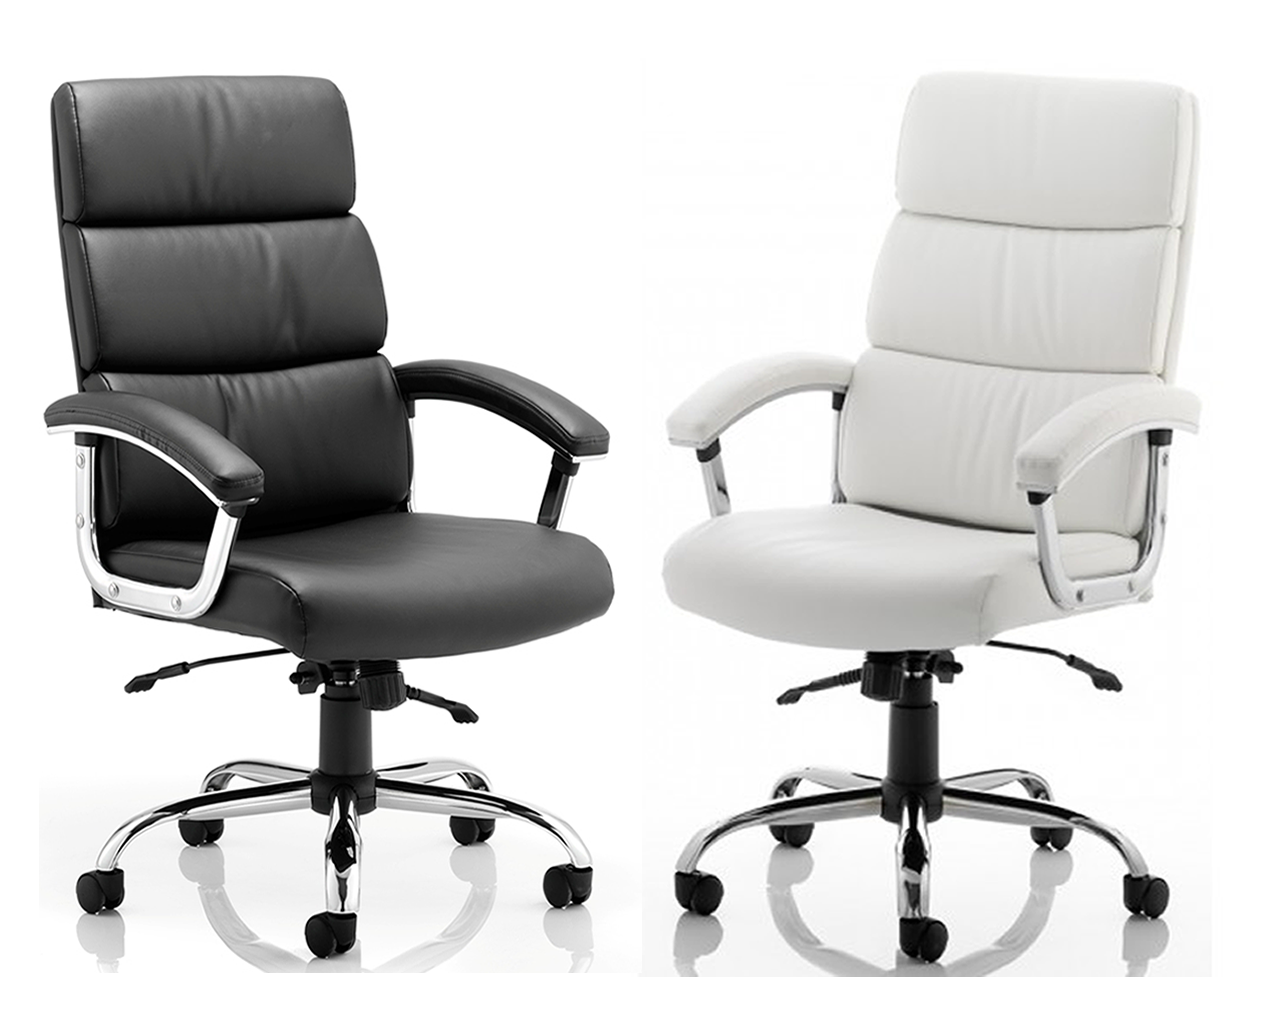 Desire High Back Leather Office Chair - Black or White Option UK